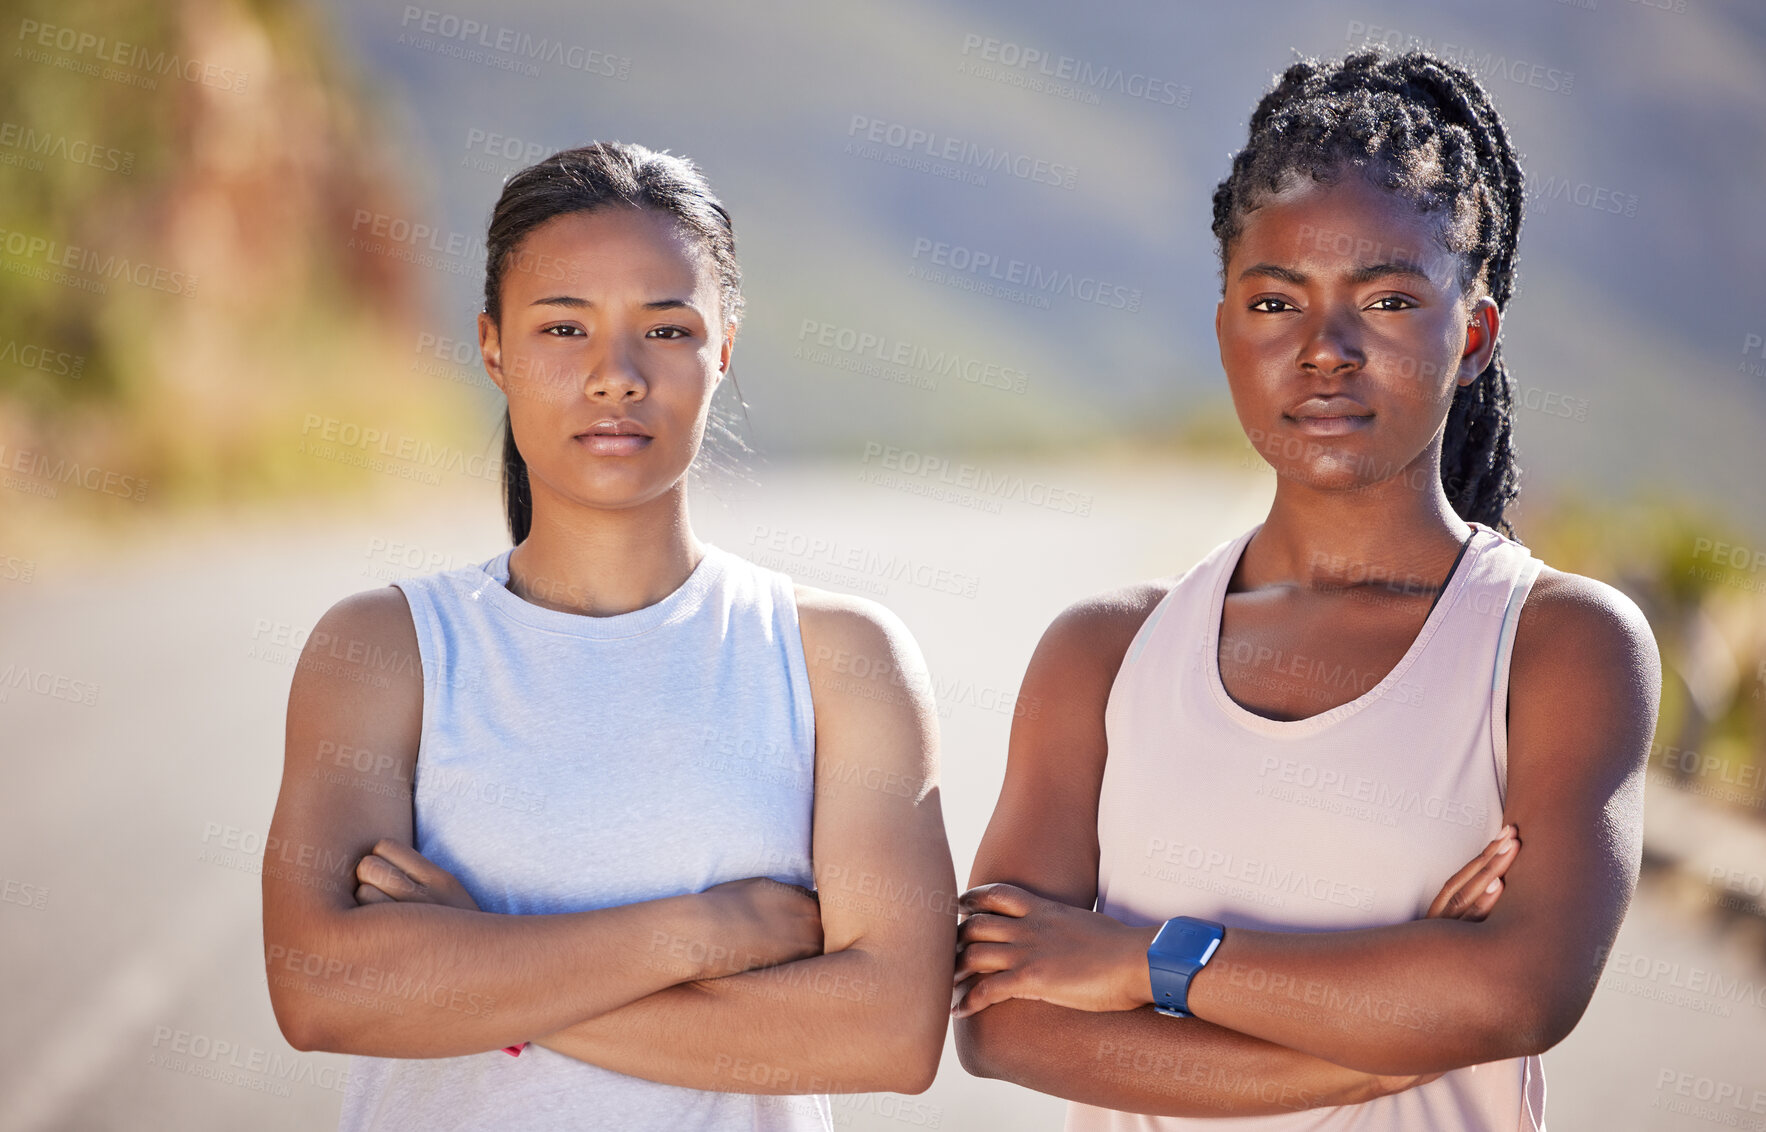 Buy stock photo Portrait of two serious looking female athletes standing with their arms crossed while out for a run on a road. Two strong sportswomen exercising outdoors